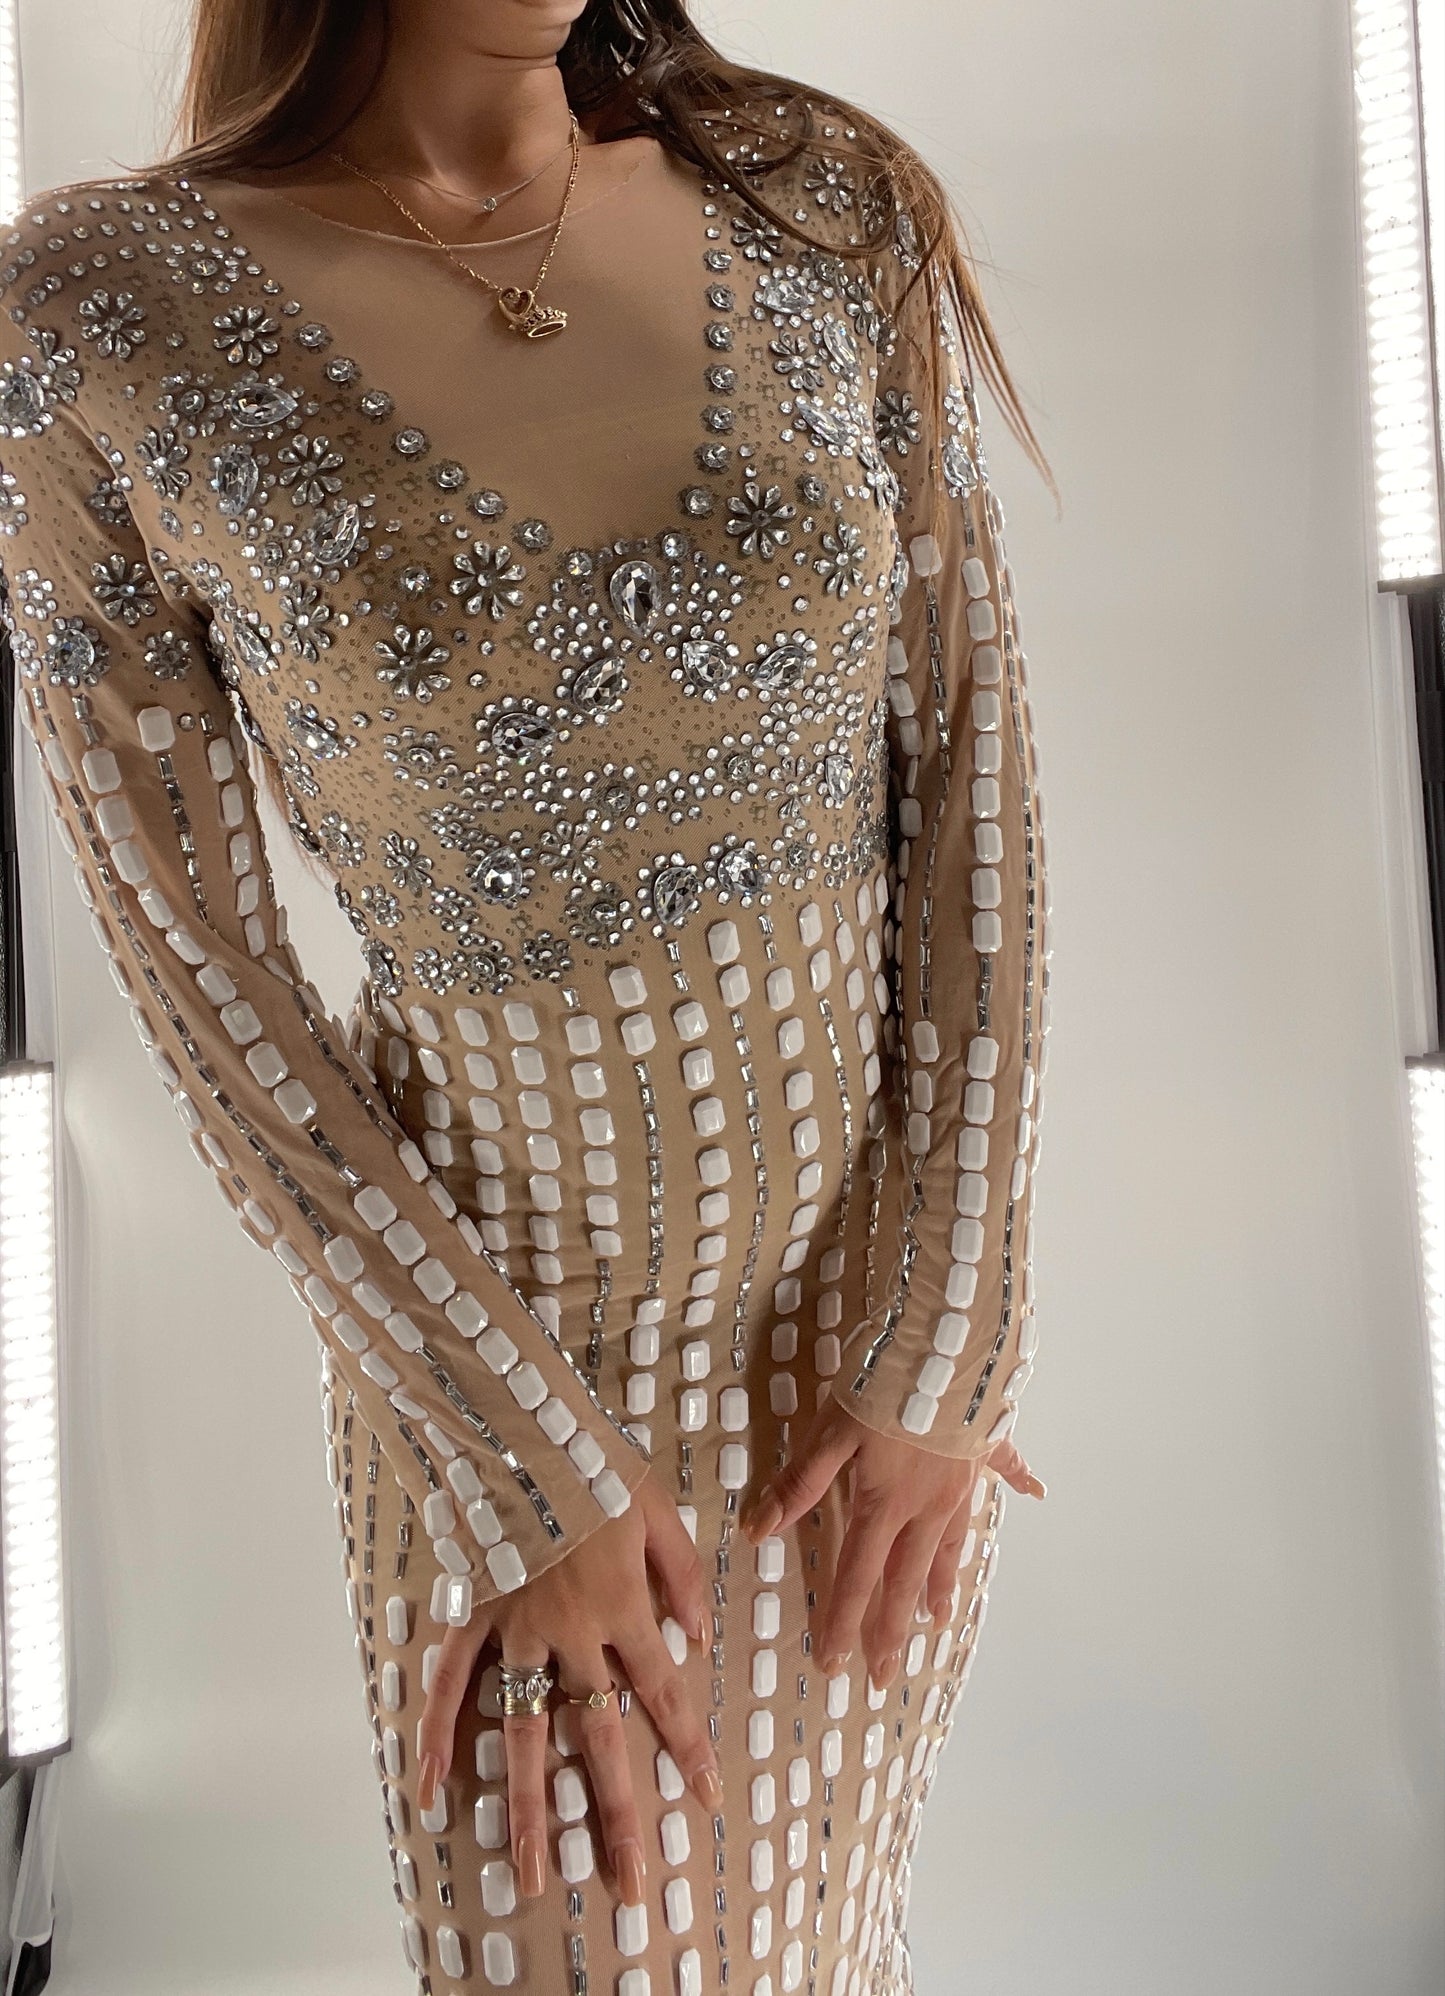 Modified Floor Length Gown Nude Underlay with Crystals and White Jewels (Medium)